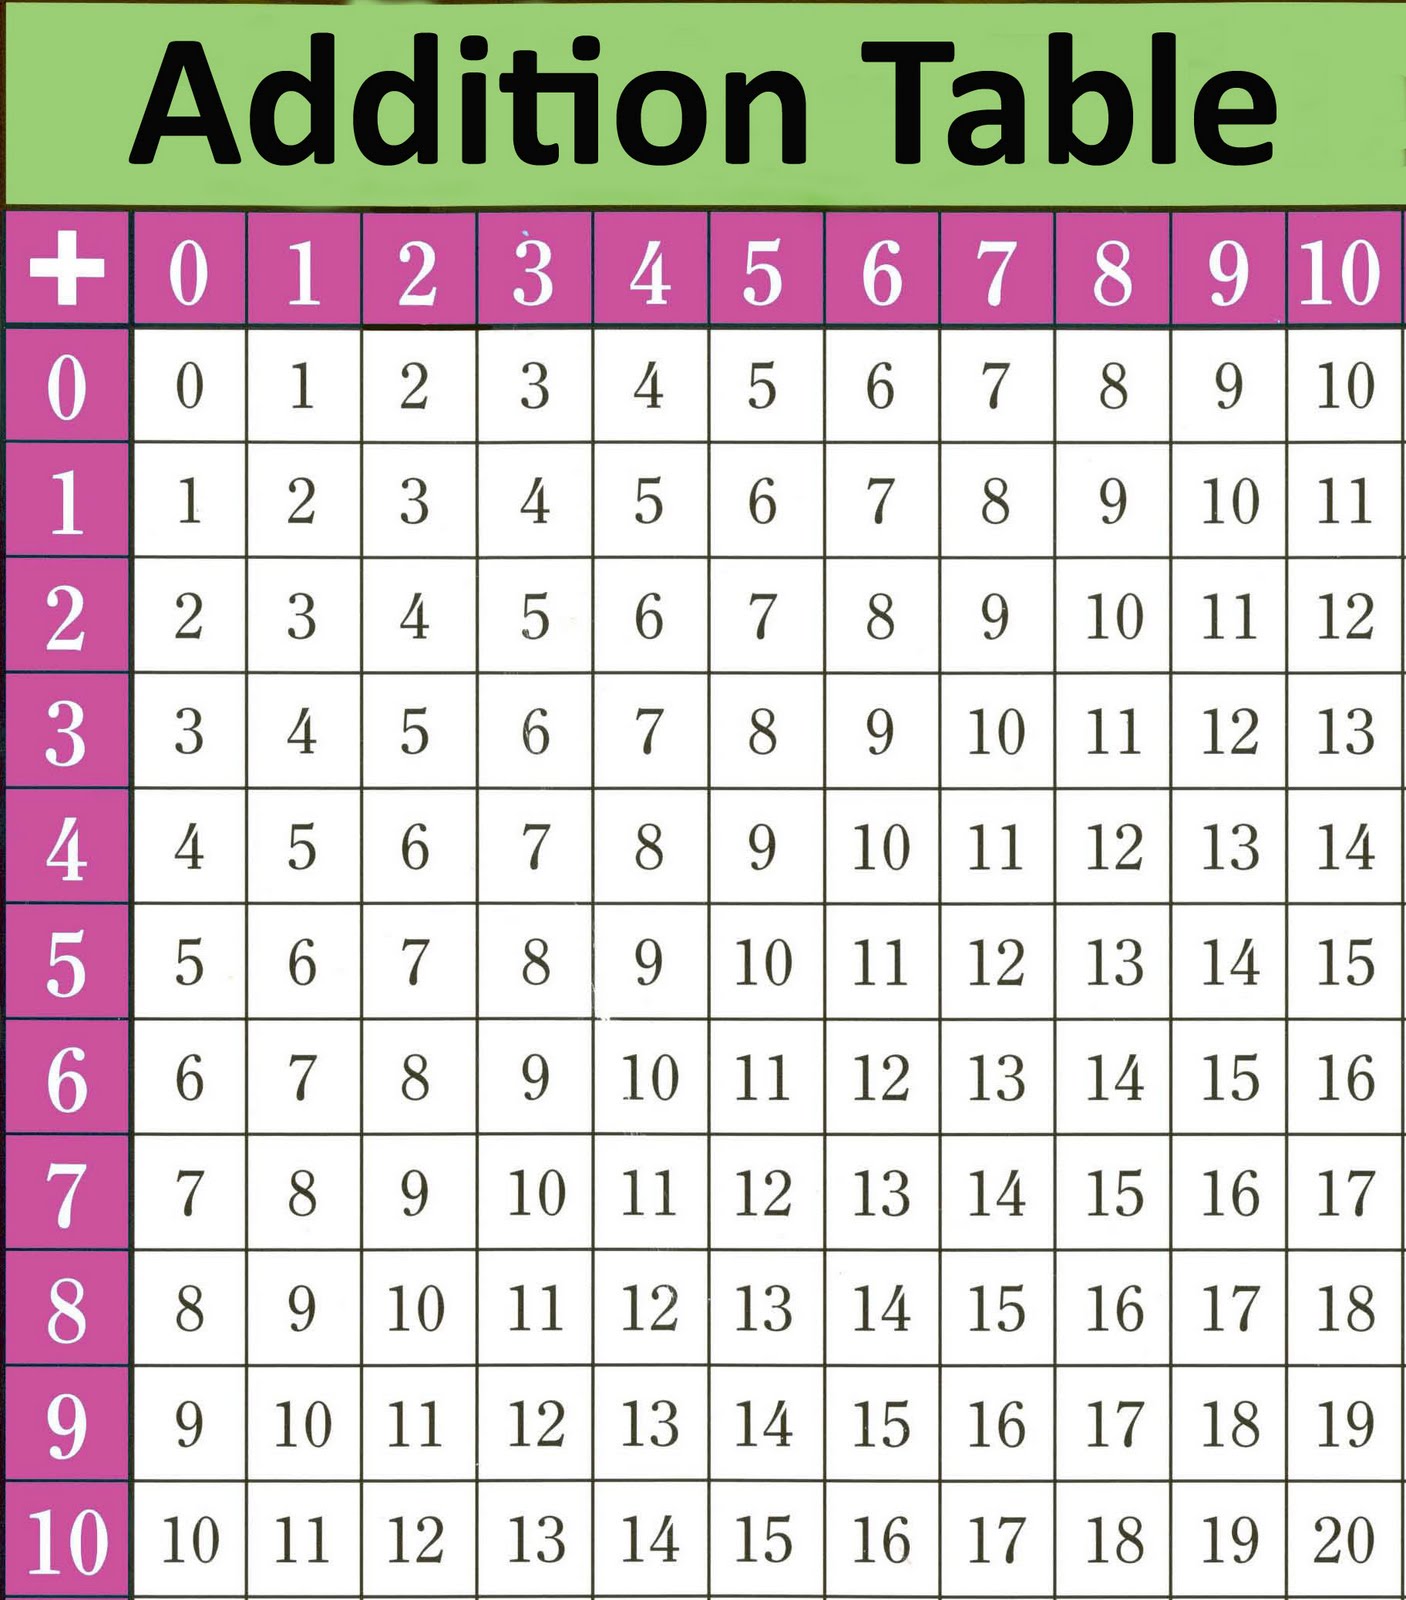 5 Best Images of Addition Table Printable Worksheets Printable